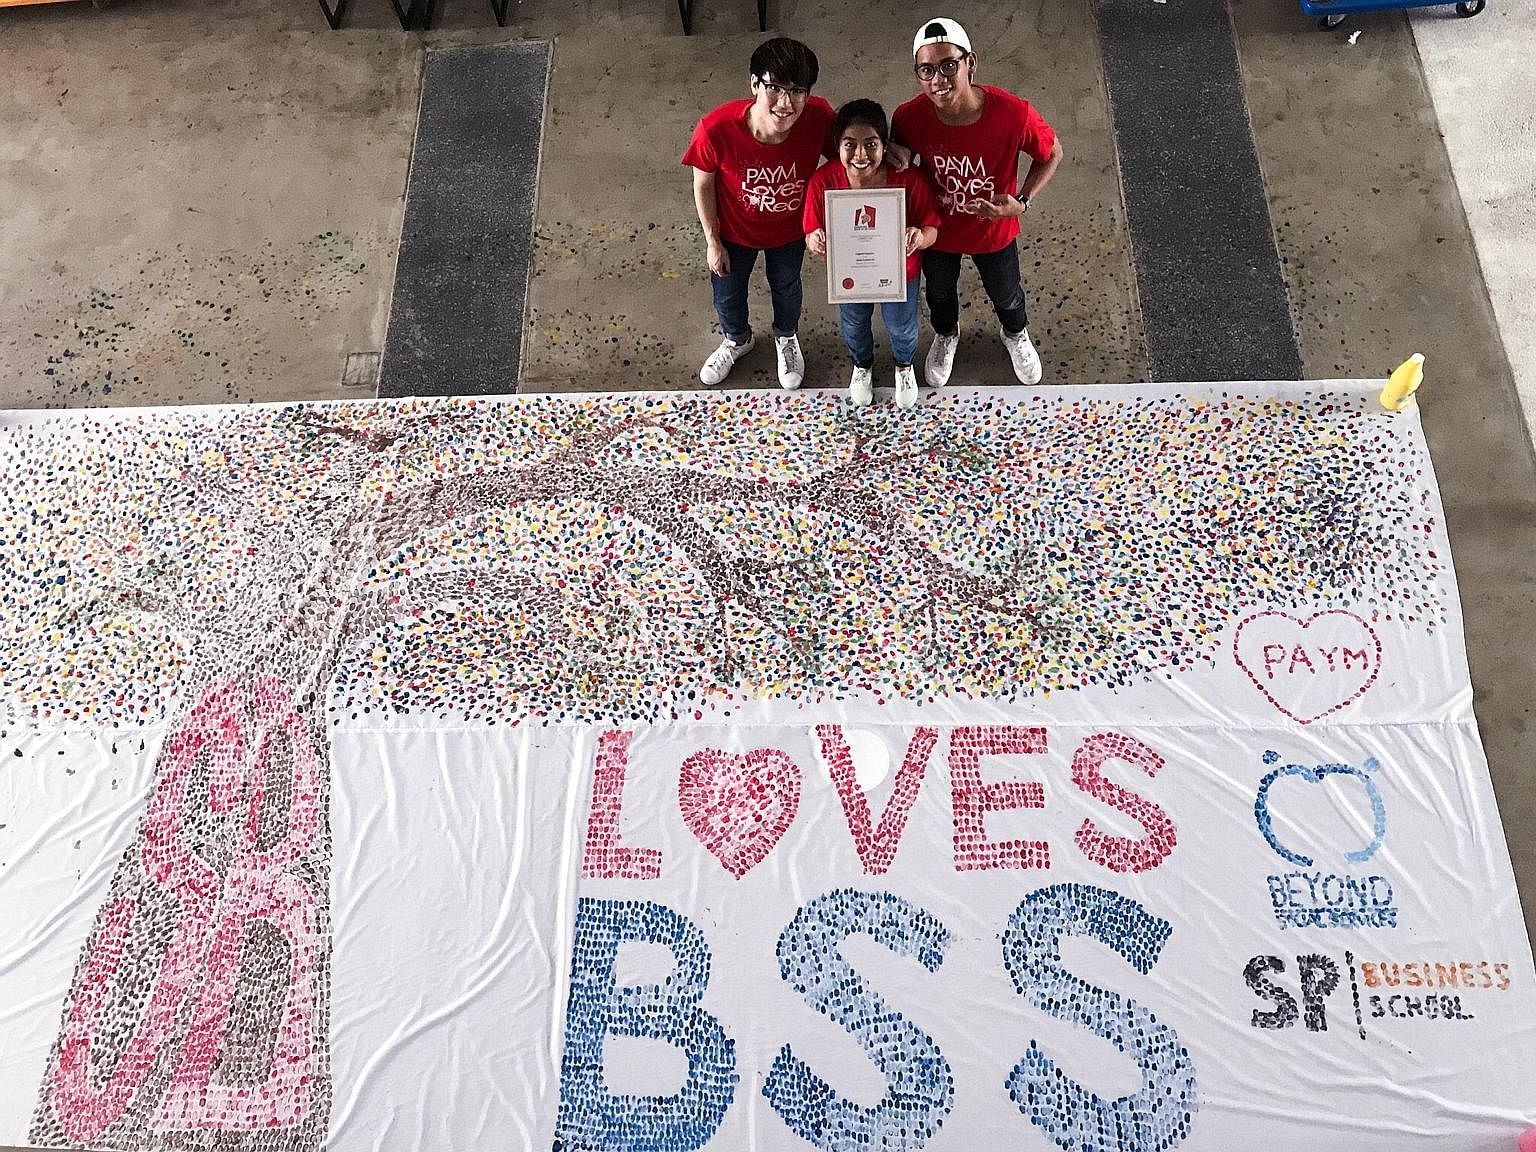 Singapore Polytechnic Business School now holds the Singapore record for the largest thumbprint art work. Done on a 3m by 6m canvas, the record-breaking venture saw 300 students from the business school contributing their fingerprints for the art wor